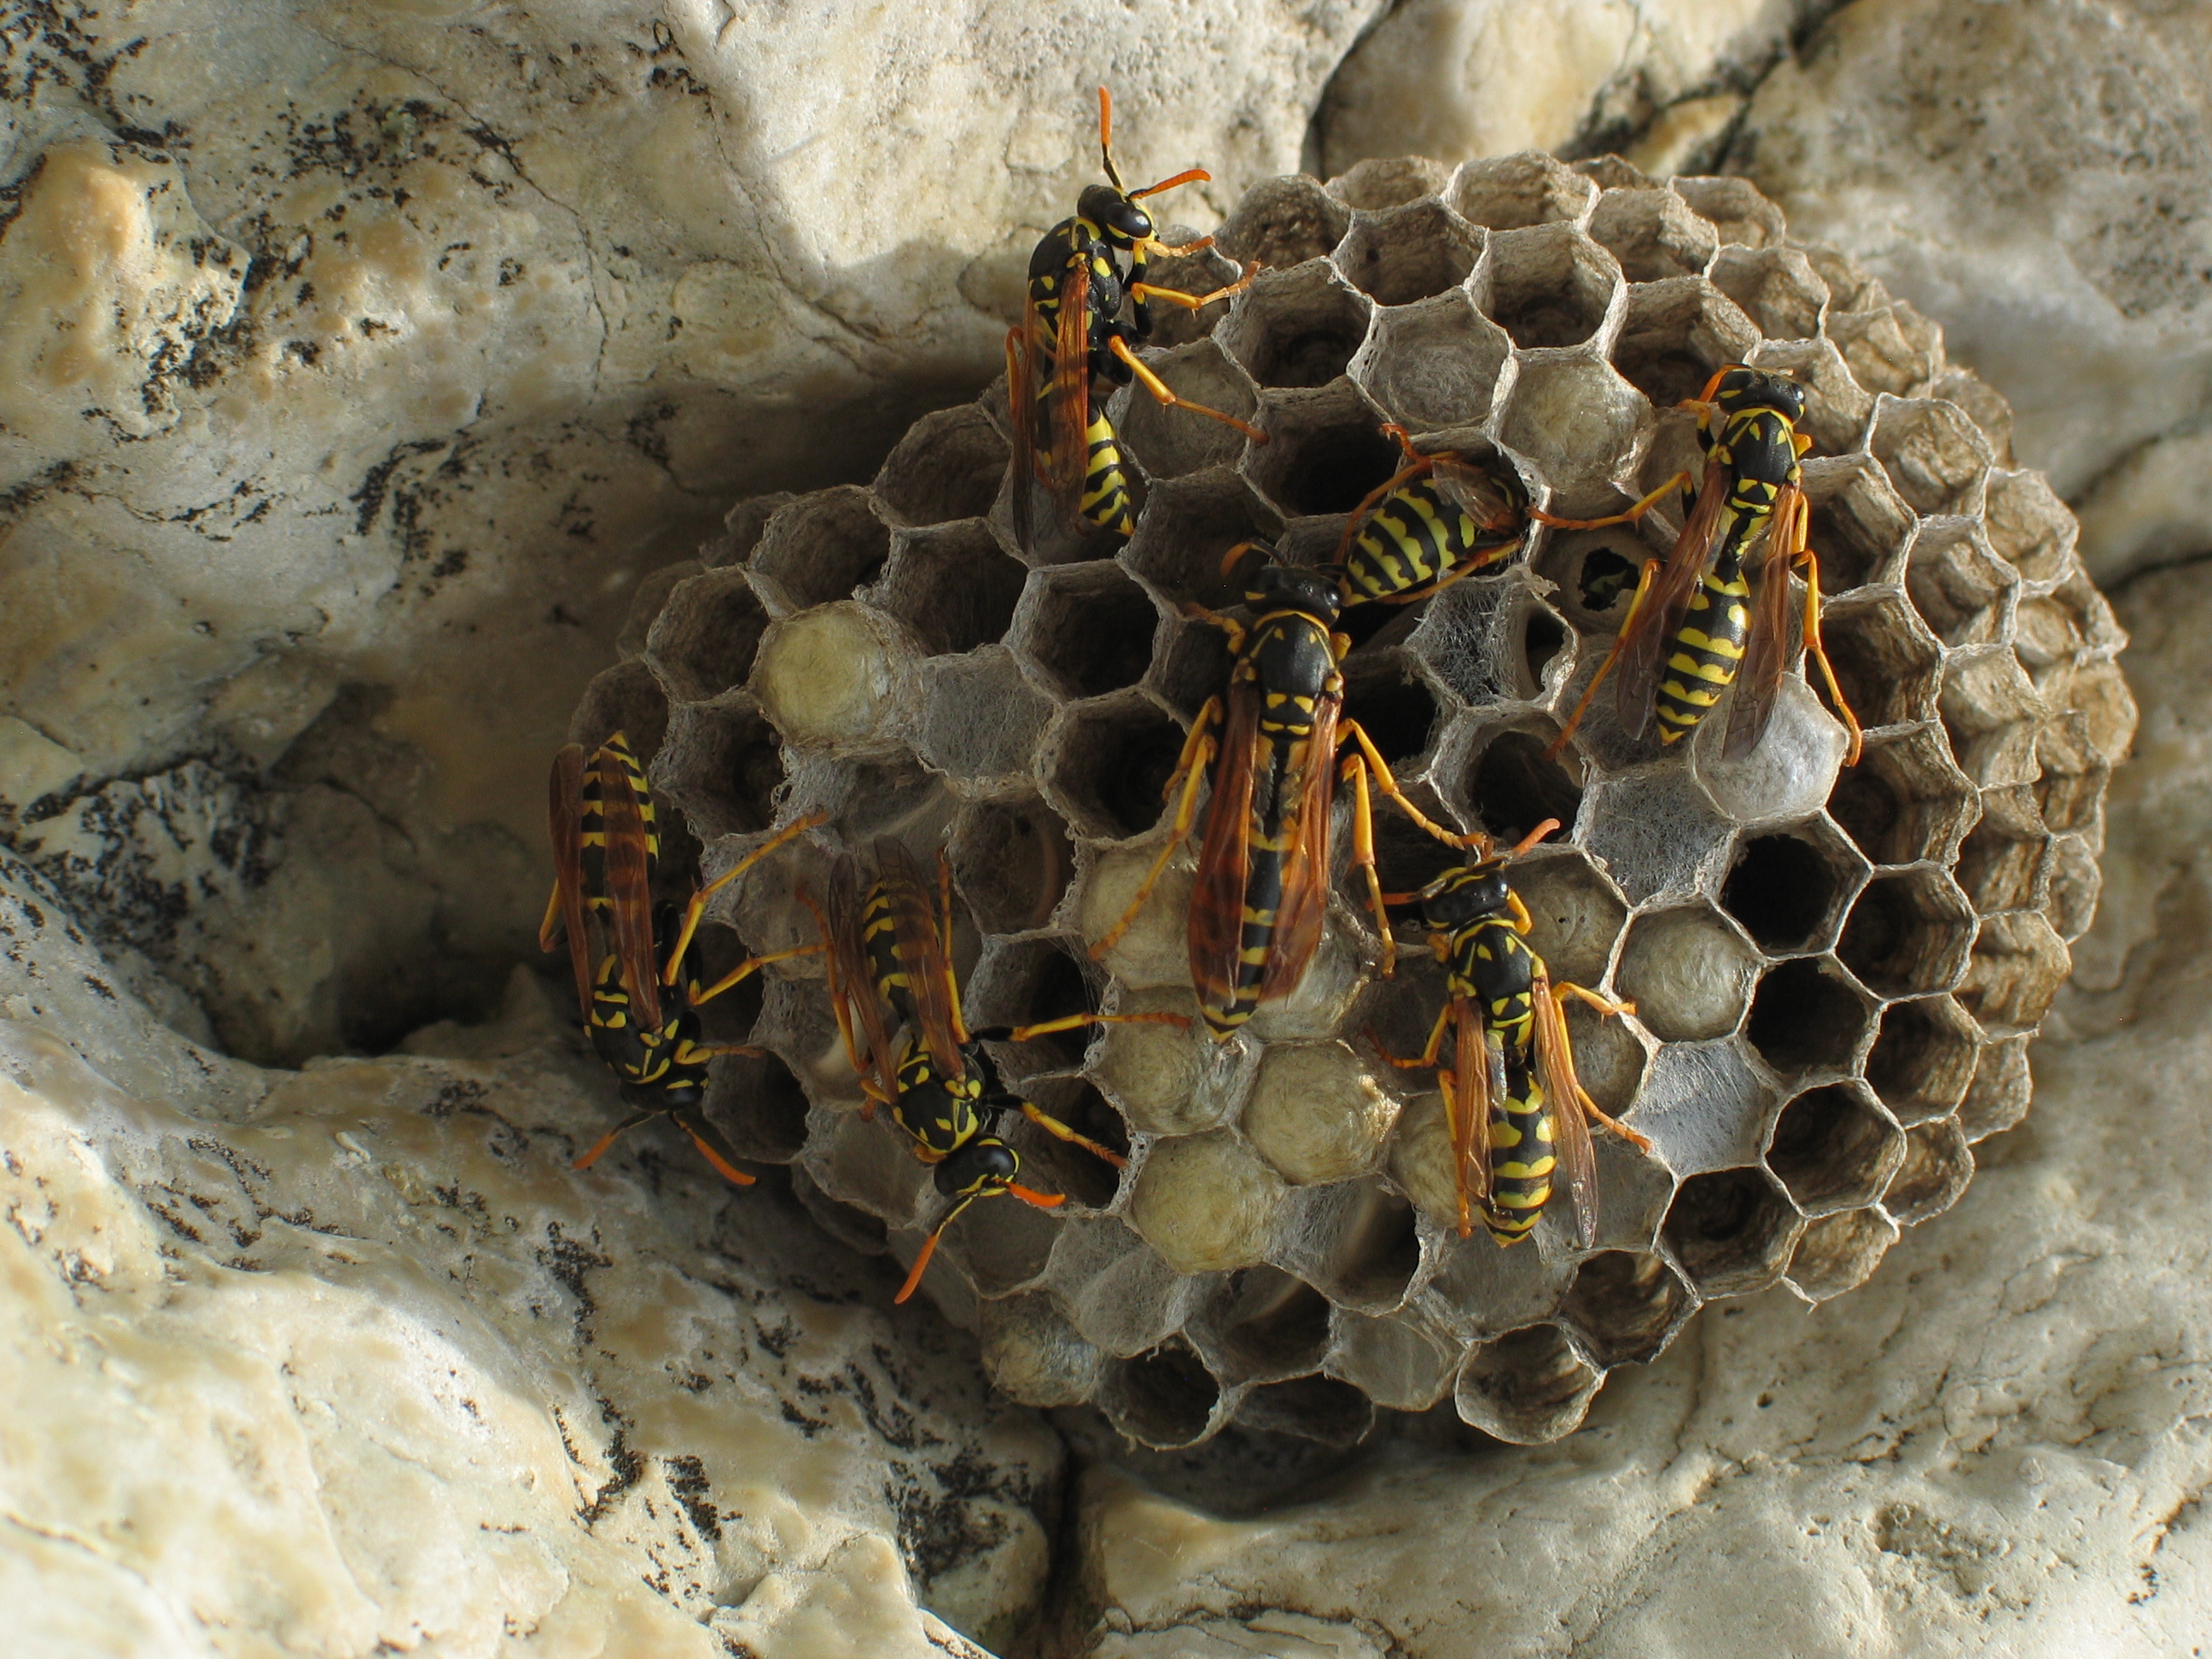 Yellow Jackets on a hive